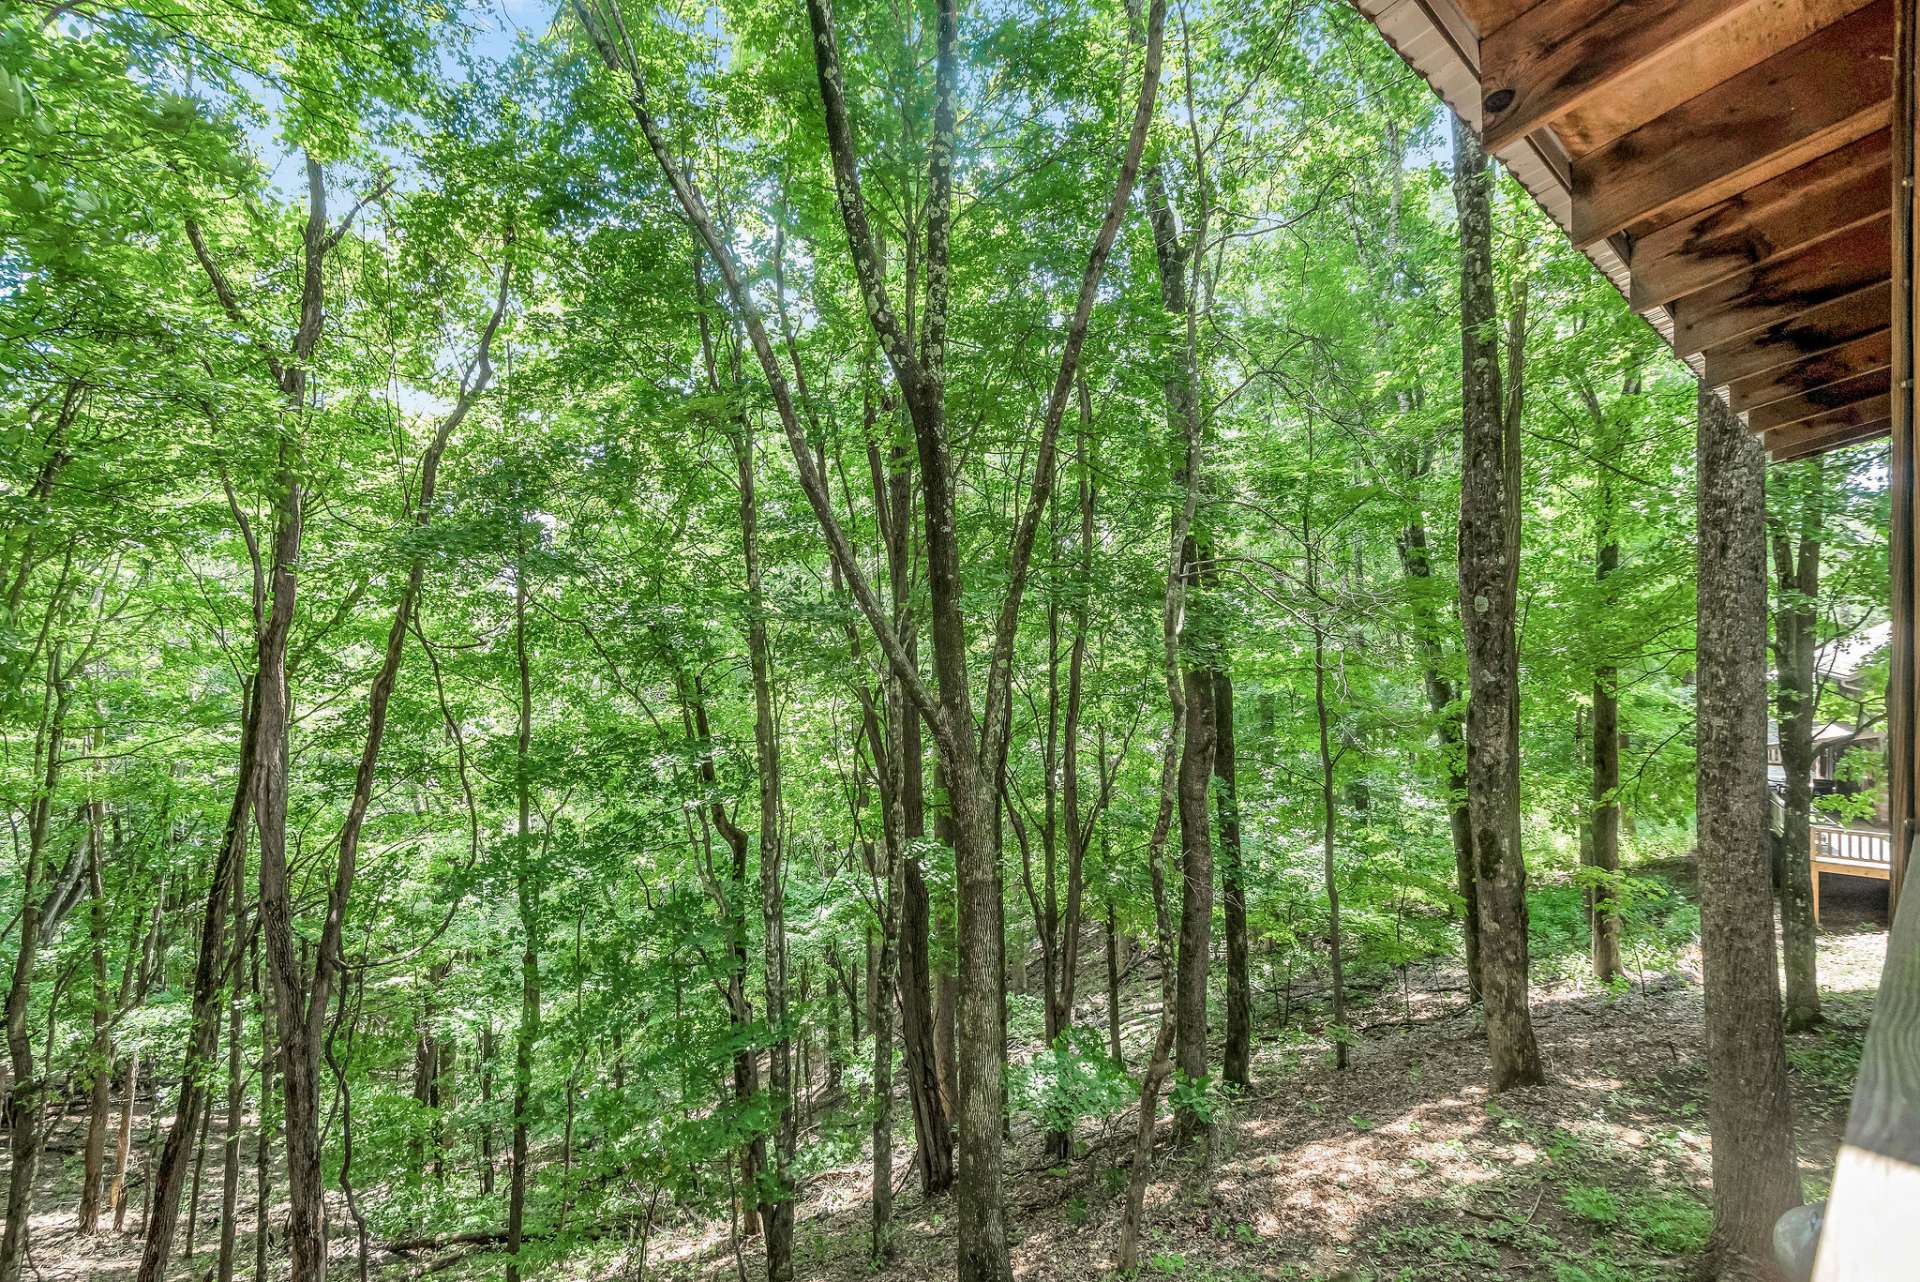 Enjoy a naturally wooded setting surrounding the cabin.